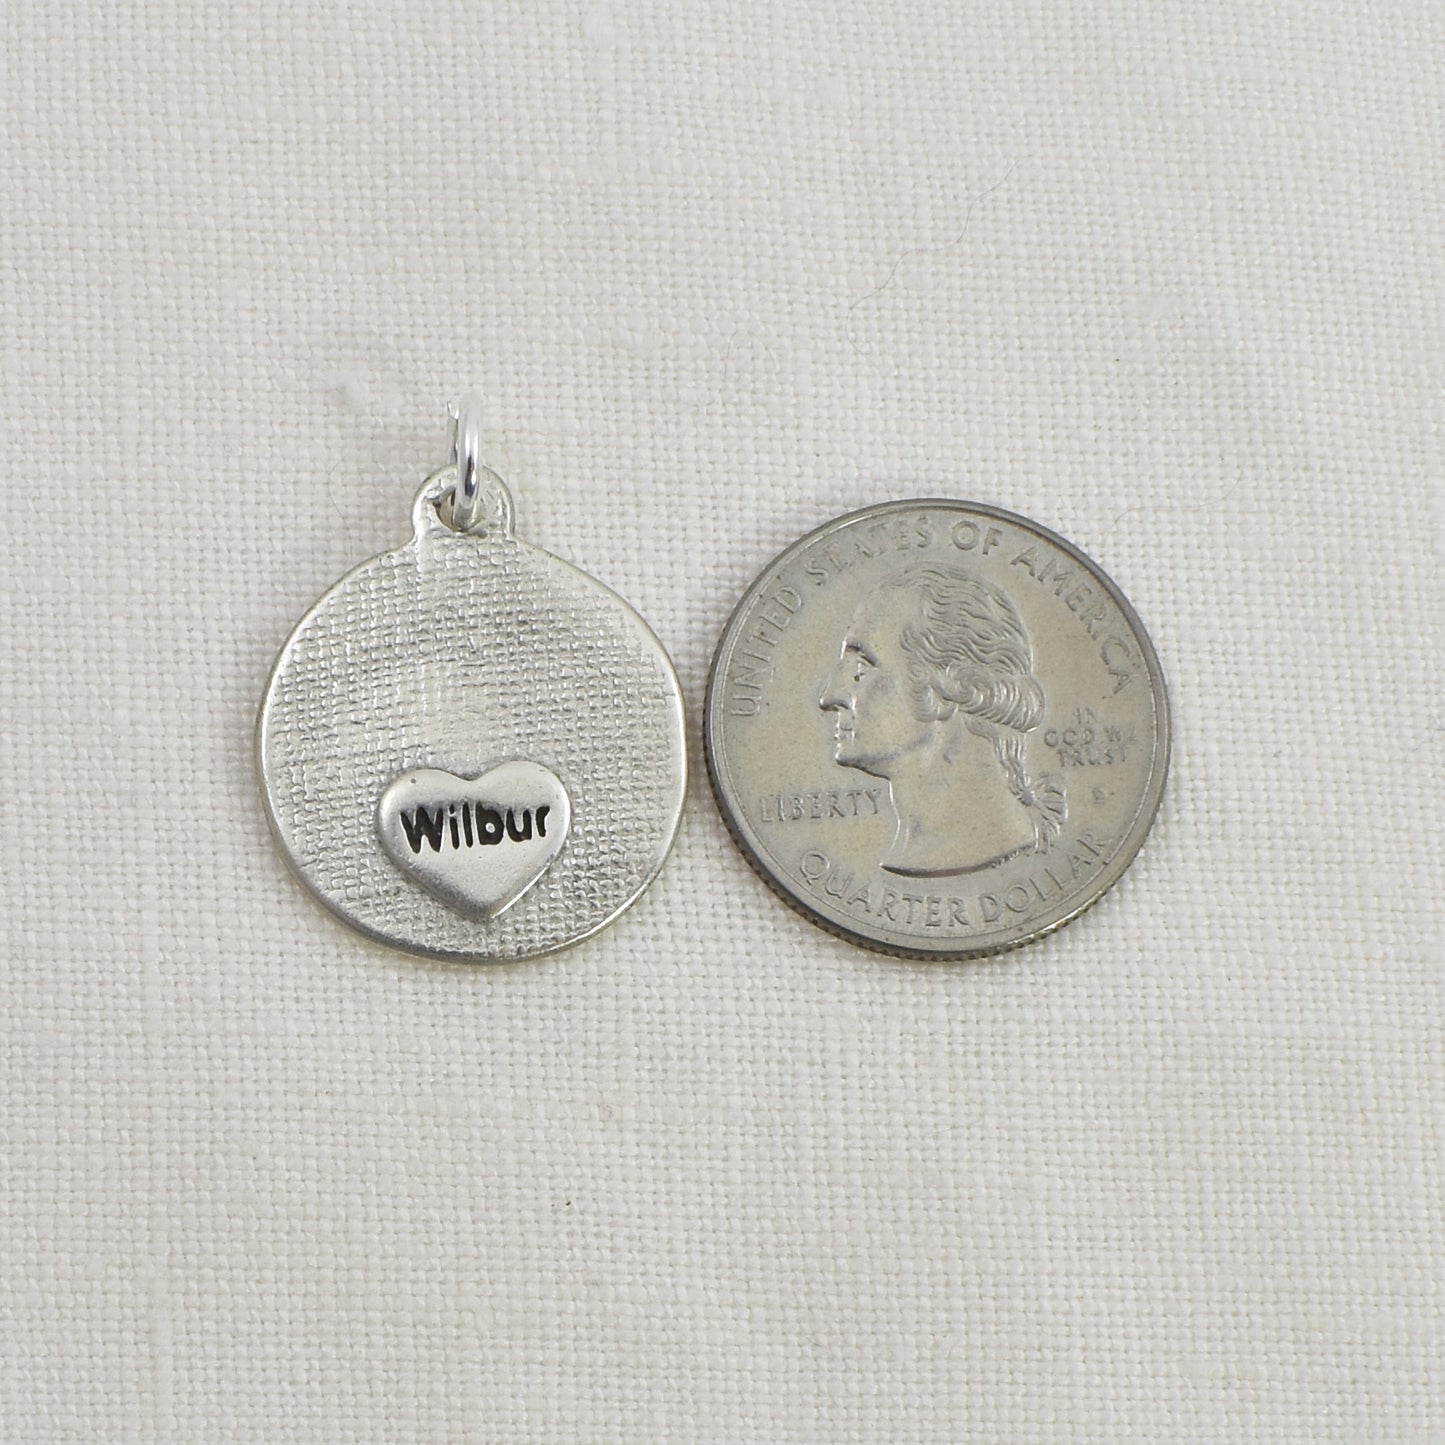 Dog Nose Embossed Circle Pendant, Necklace or Keychain back and shown next to quarter for size reference